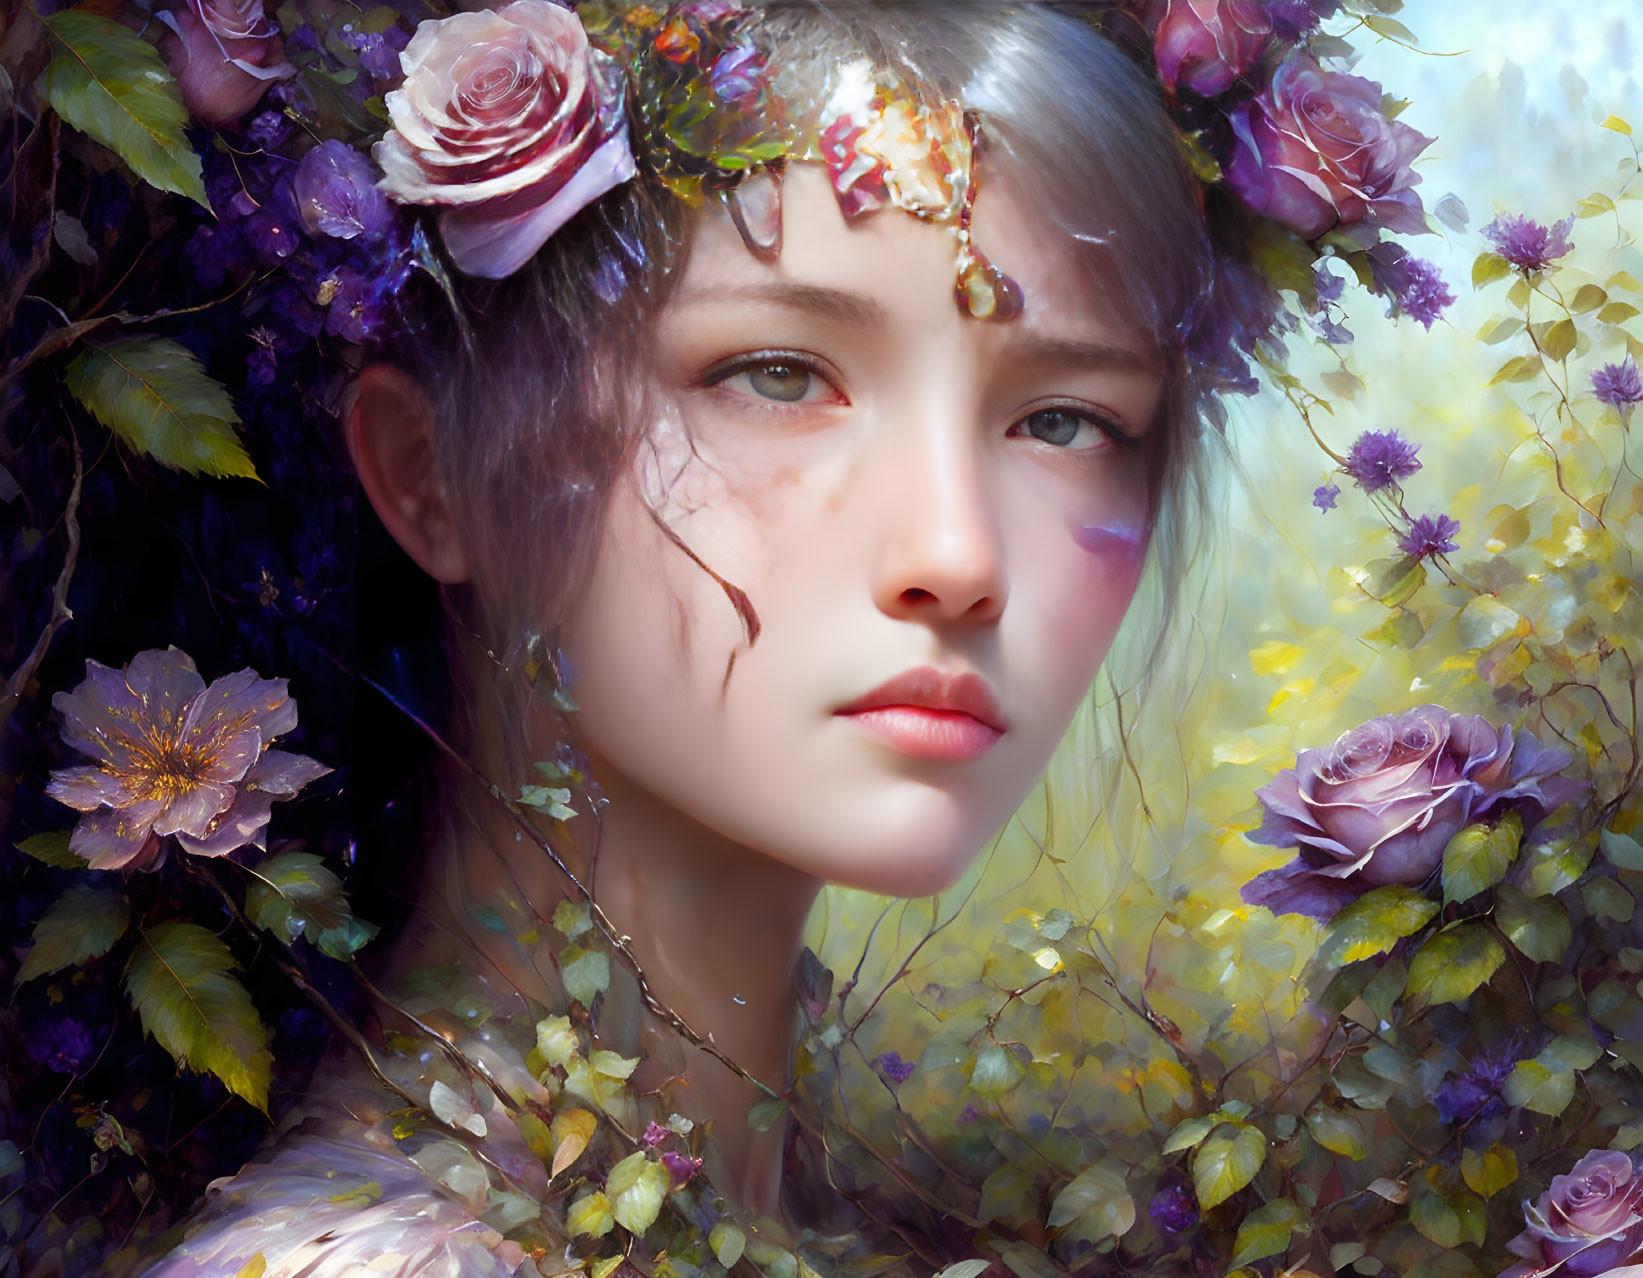 Ethereal woman with flowers in lush purple blossoms